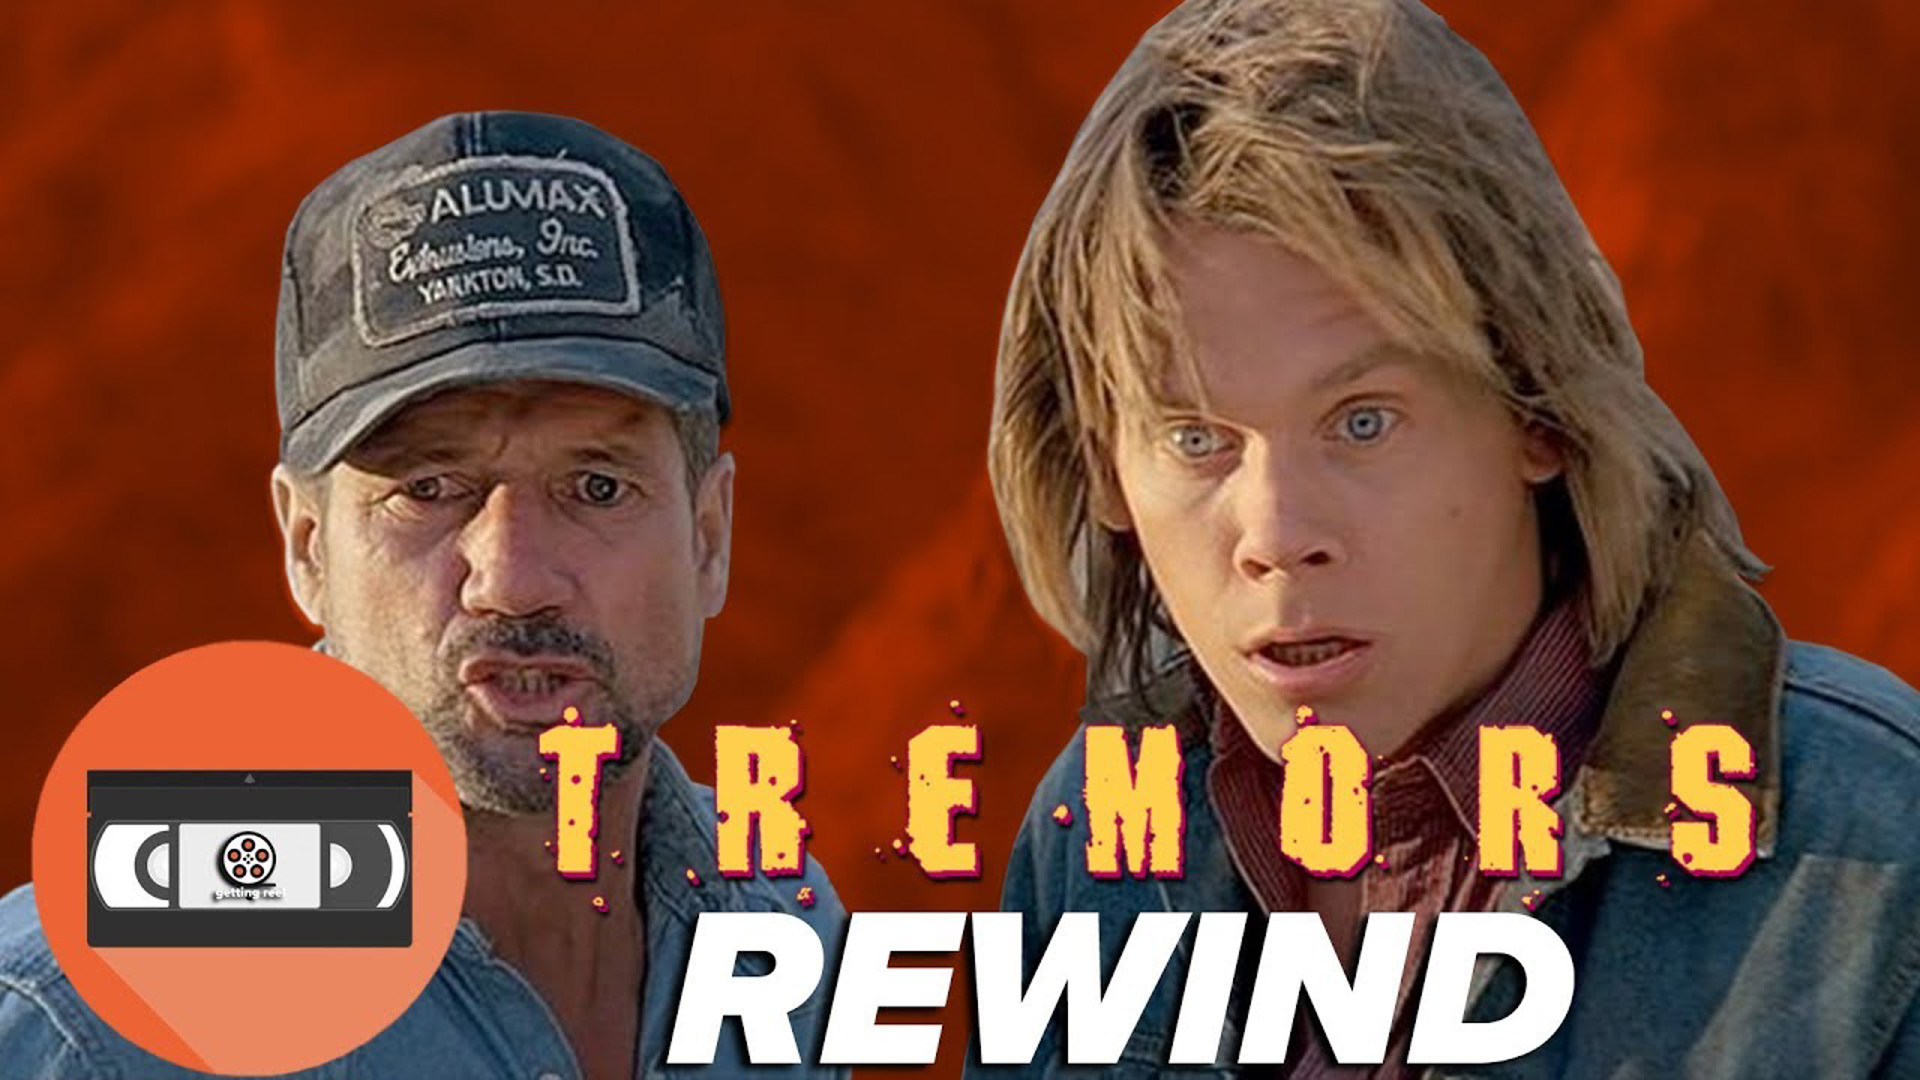 We're back to tell you to watch Tremors, perhaps the most perfect bad movie to ever exist. And we're not saying it's bad, just that it's so bad it's good!